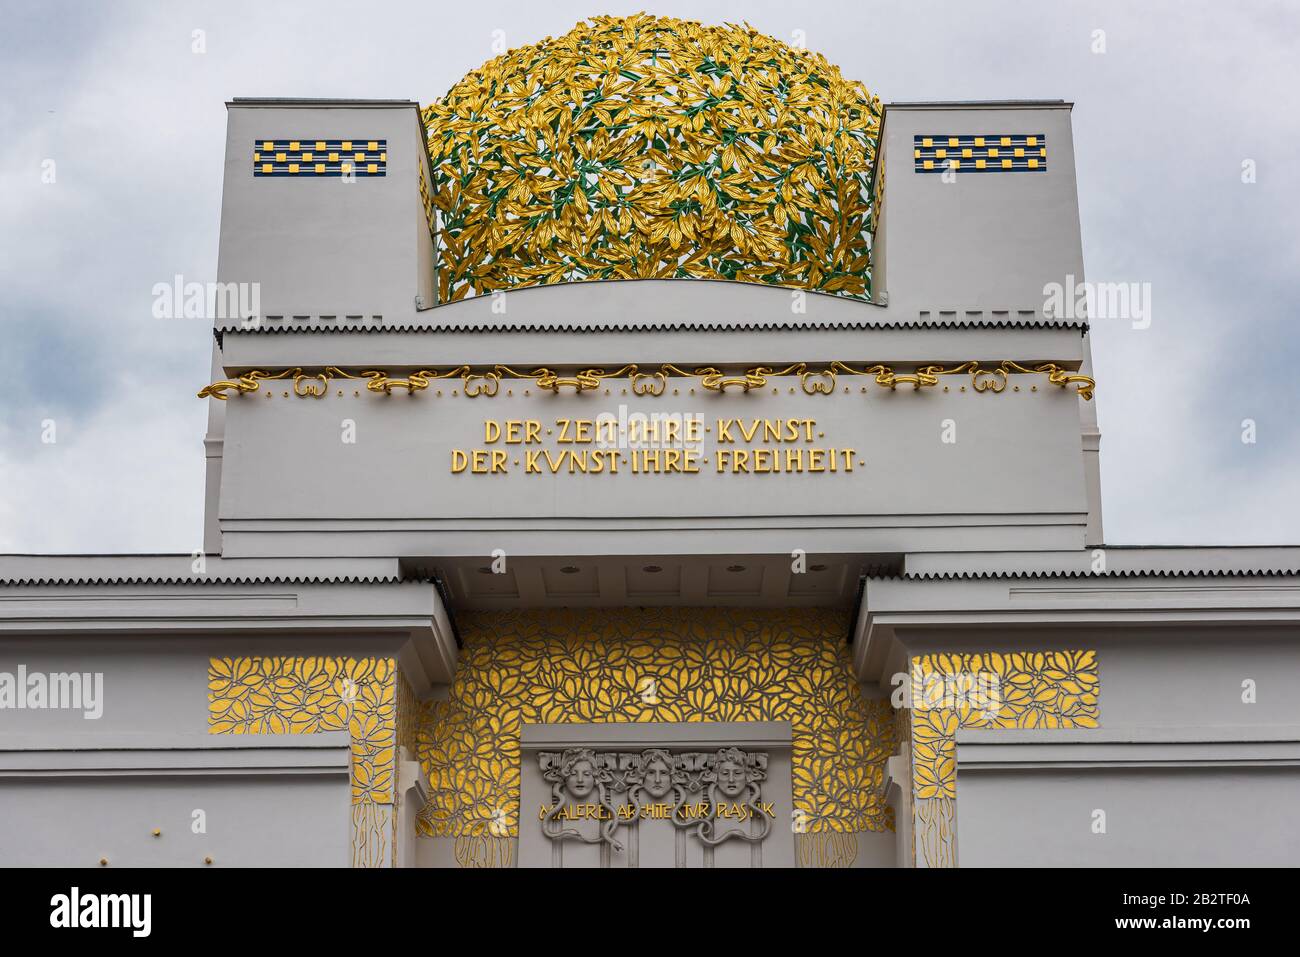 The Secession Building is an exhibition hall built in 1898 by Joseph Maria Olbrich as an architectural manifesto for the Vienna Secession Stock Photo